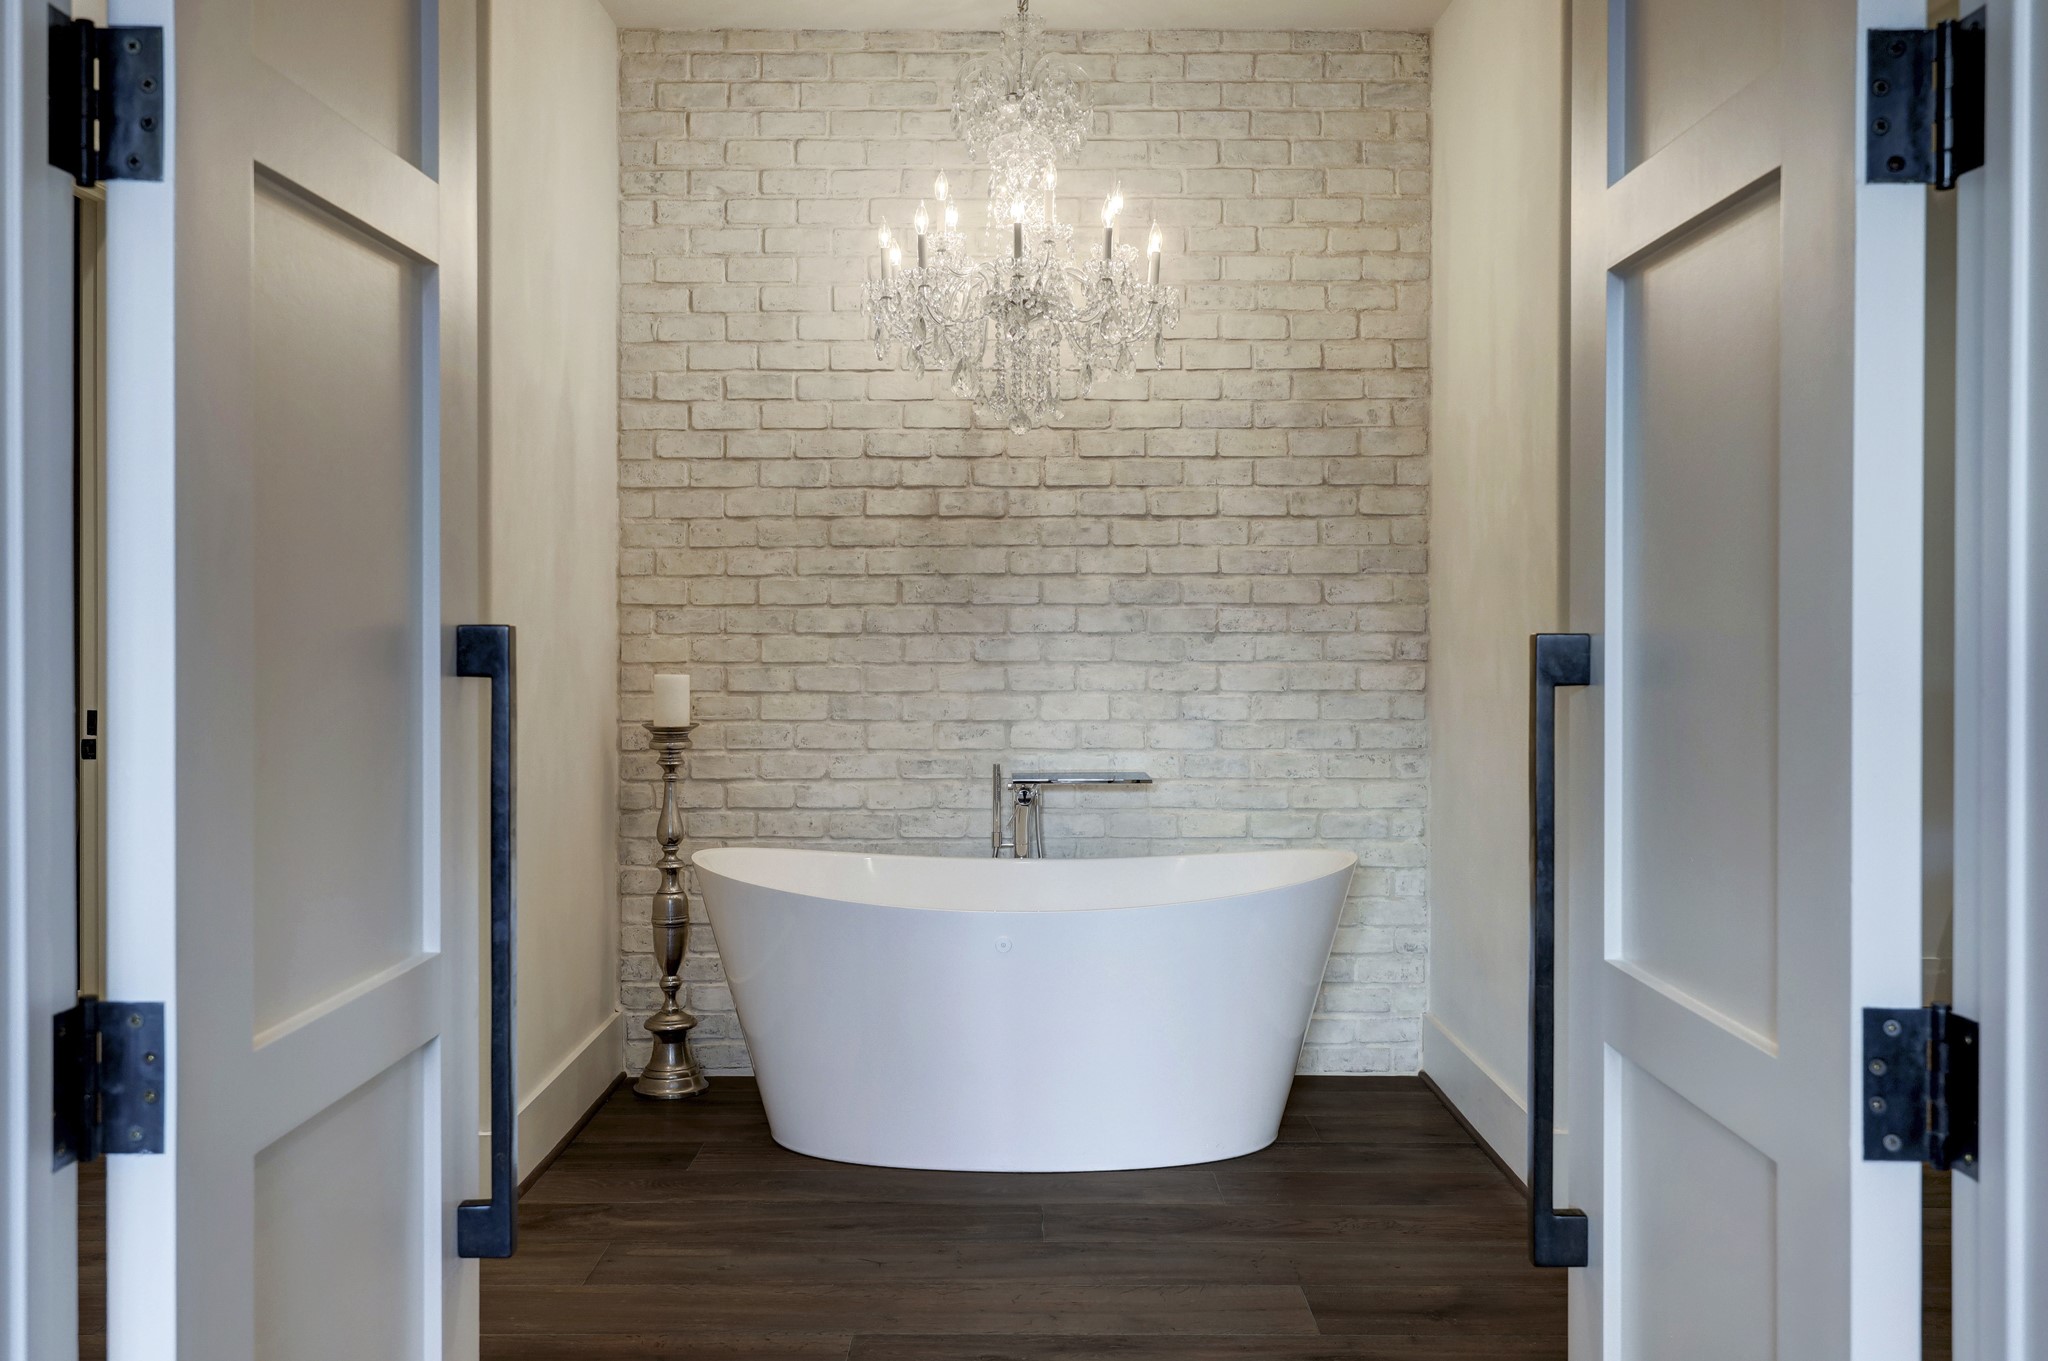 Upon entering the primary bathroom is a large soaking tub, with a dazzling glass chandelier above.